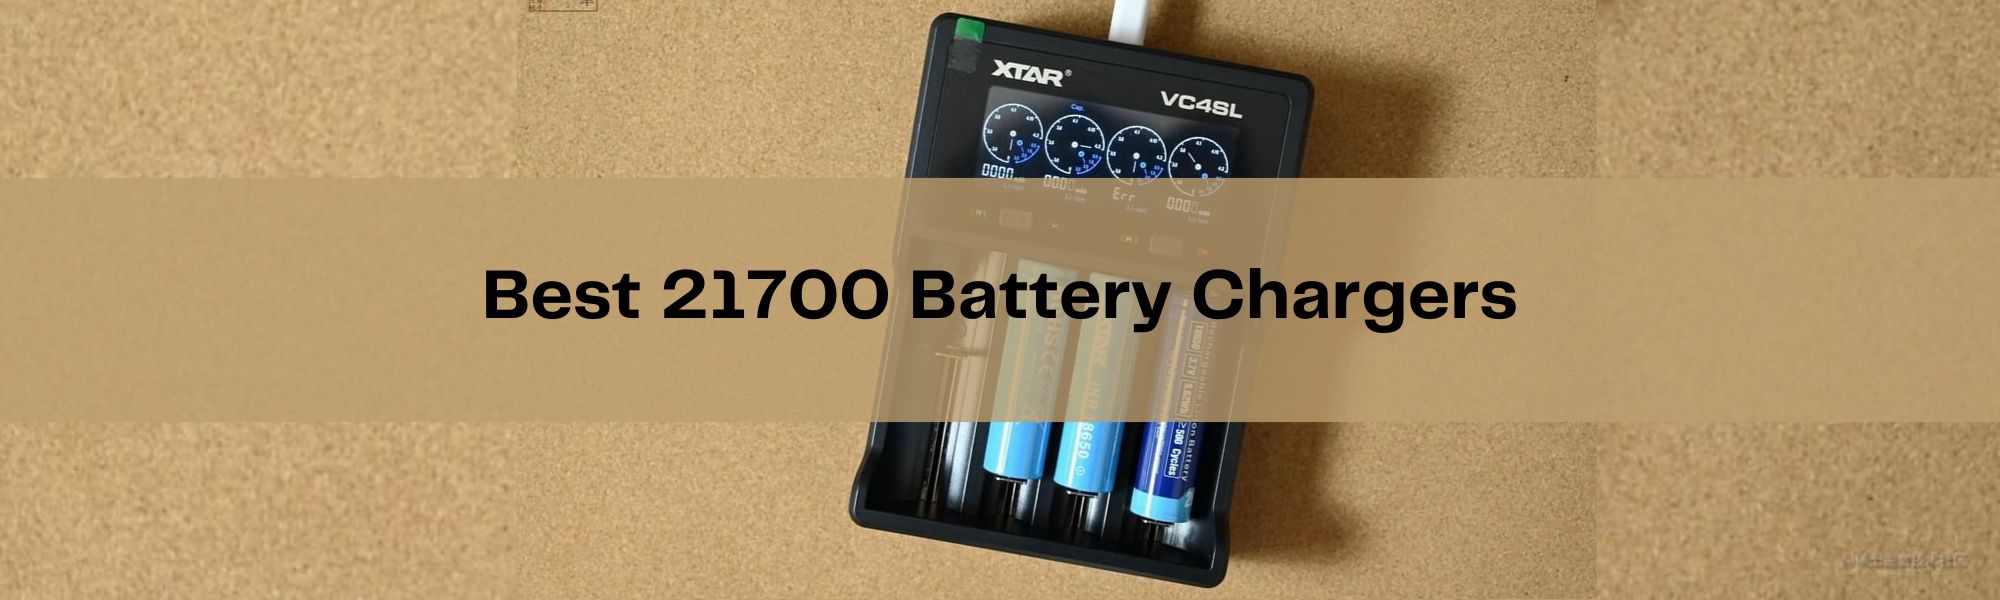 Best 21700 battery chargers